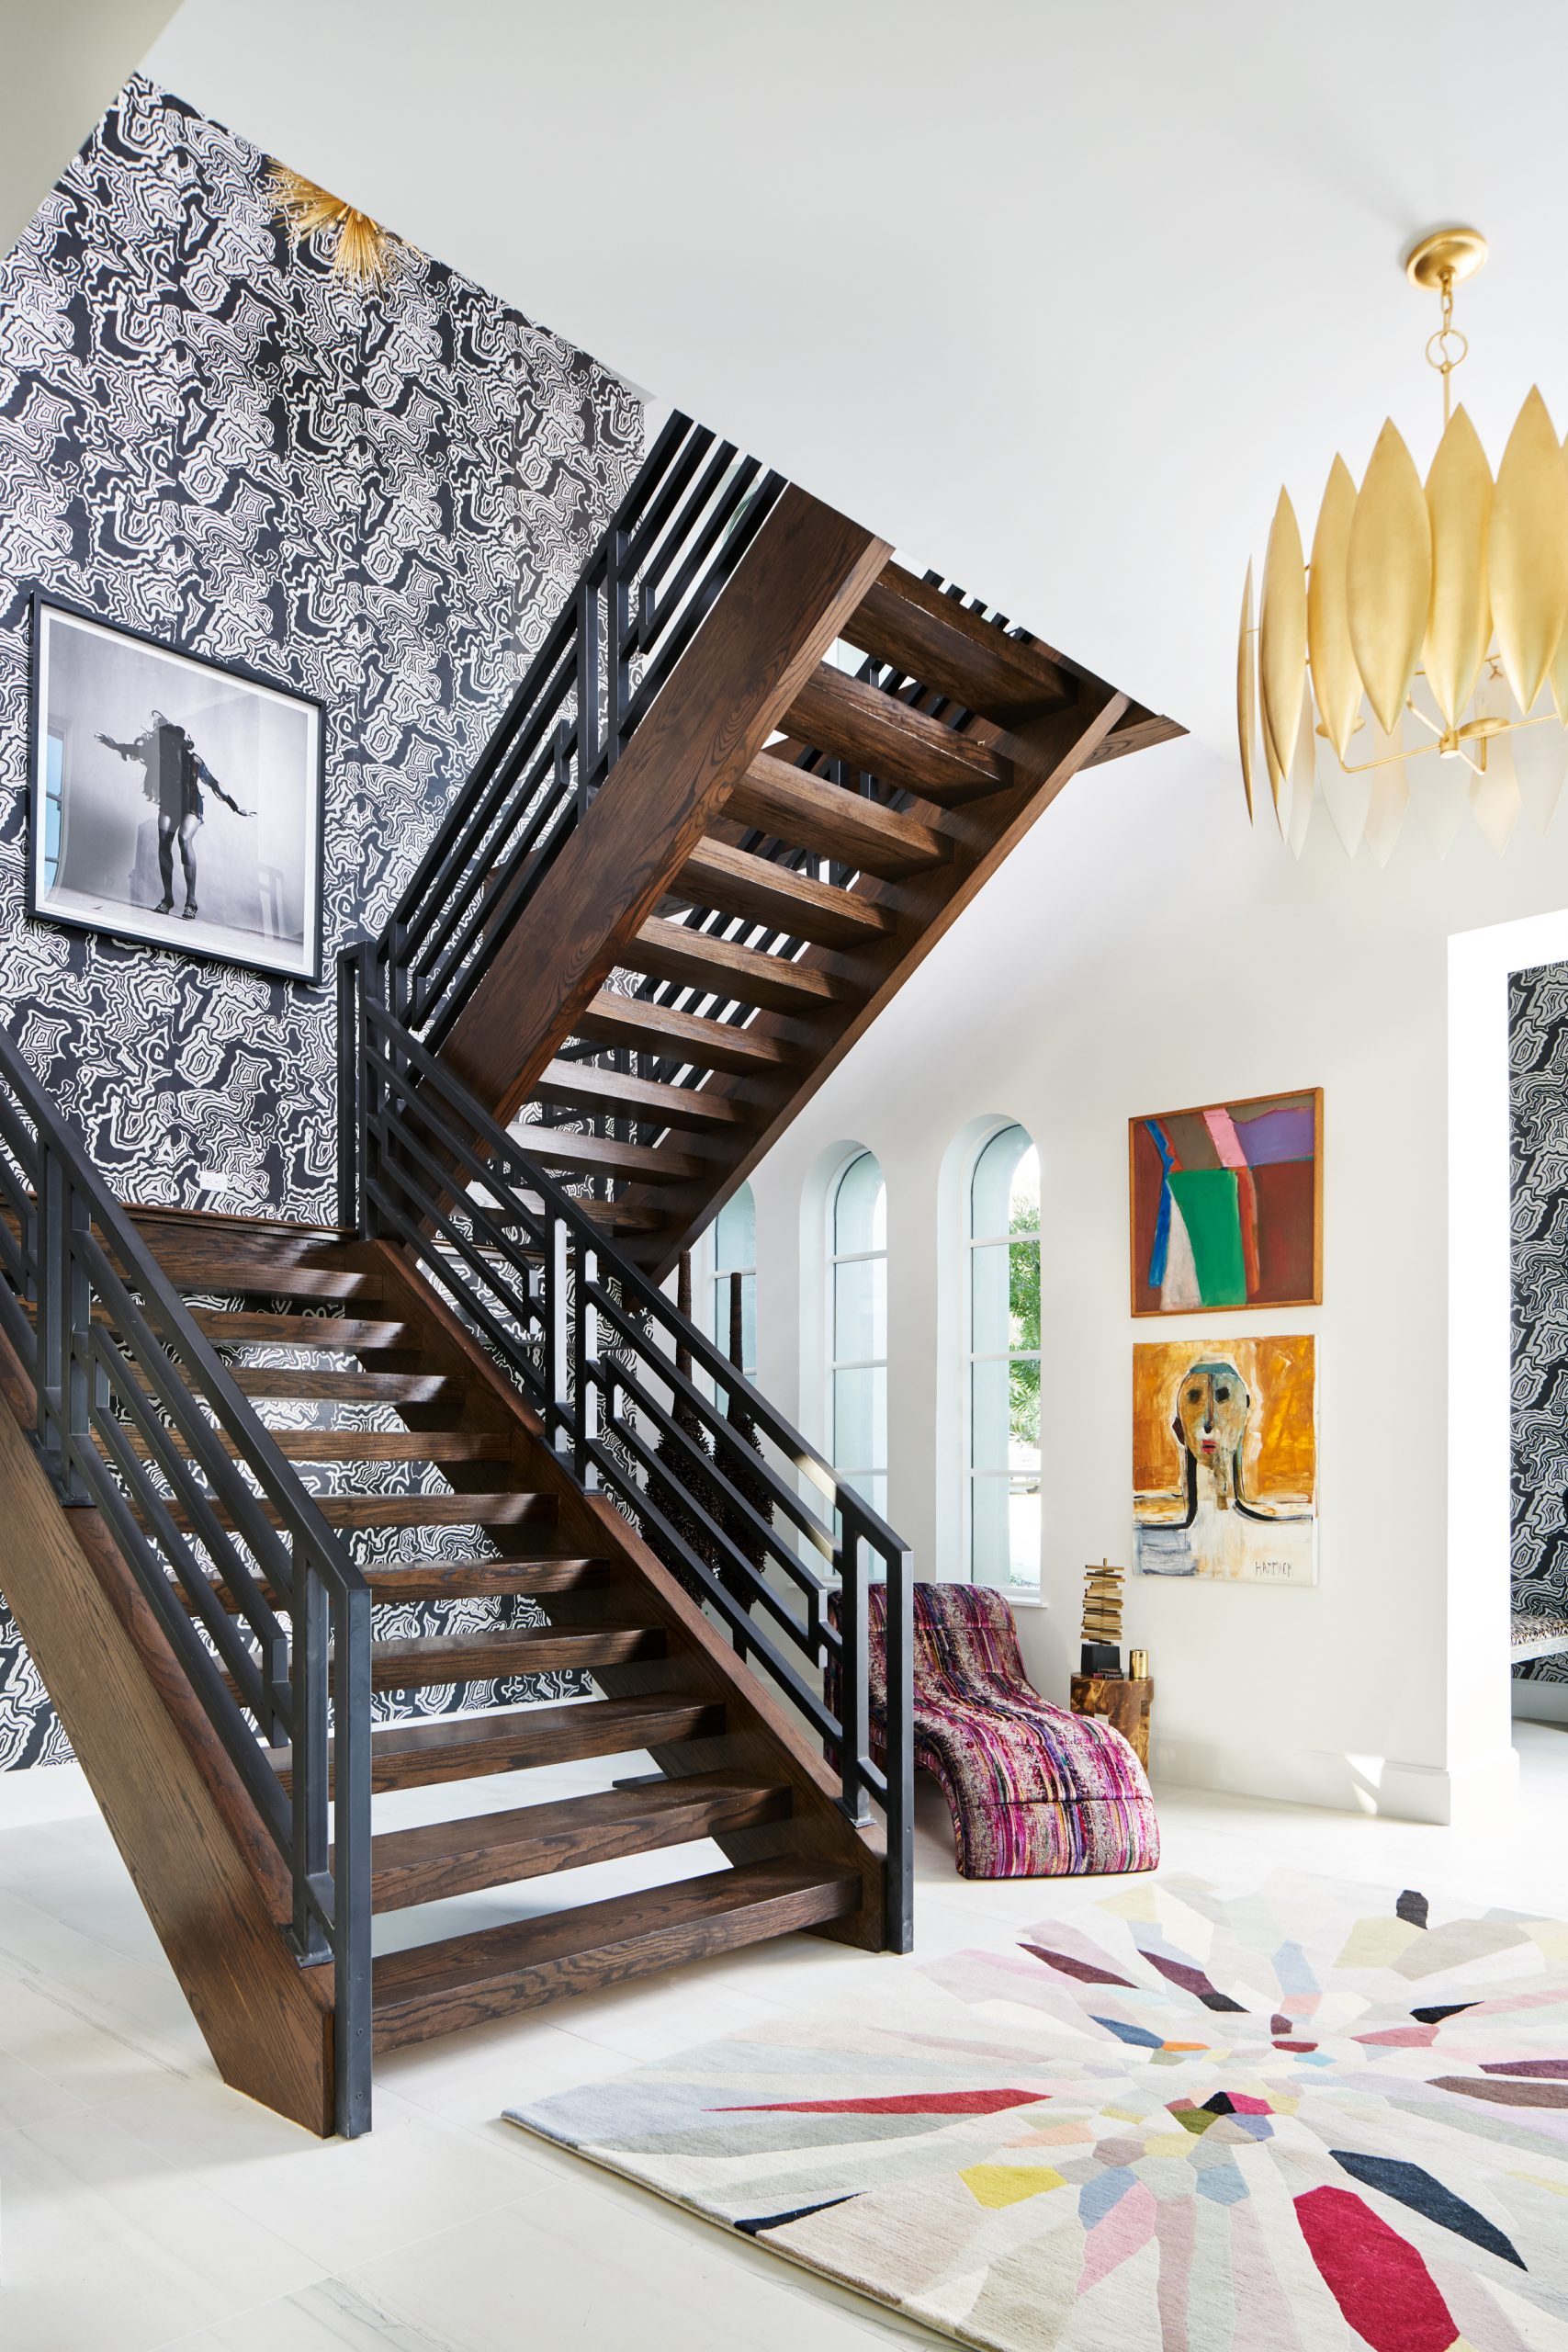 Traditional Home Dallas Showhouse, Bridget Beari Wallcovering, Buscemi wall covering, tina turner art, geometric railing, chaise lounger, s. harris brushstroke, double volume entry, modern staircase, entryway, circa lighting, gold chandelier, green and gold lamp, easel, Jonathan Adler easel, coffee table books, tom ford book, harpers bazaar book, credenza, dark credenza, black credenza, circle accent furniture, bowl, s. harris, drapery, curtains , gold lighting, gold chandelier, colorful rug, the rug company, original art, human form art